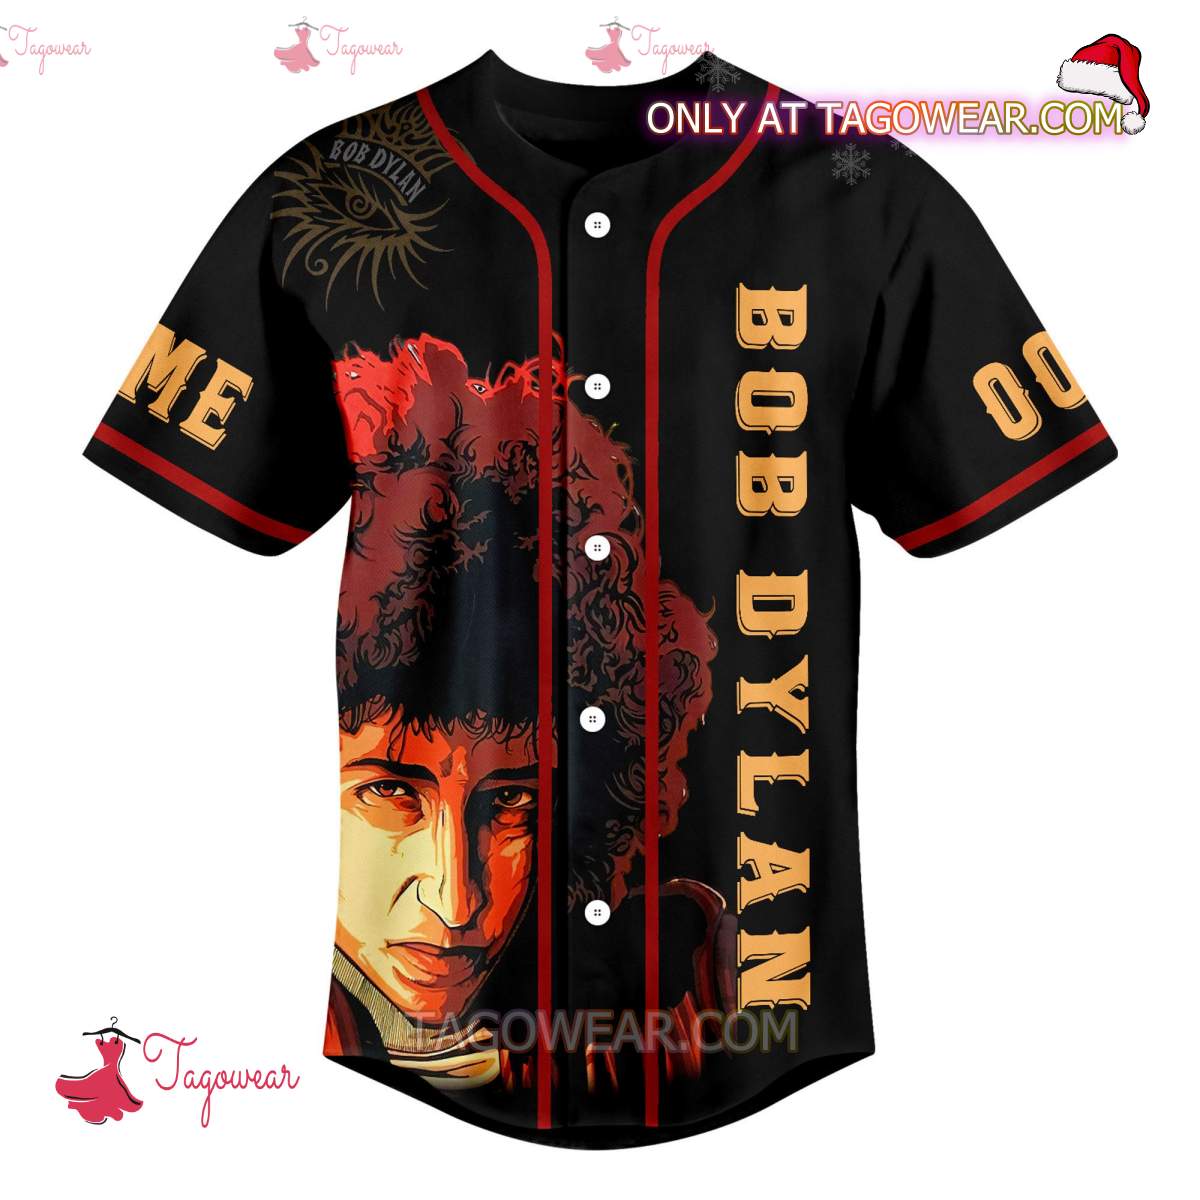 Bob Dylan Fan For Life Where Words Fail His Music Speaks Personalized Baseball Jersey a